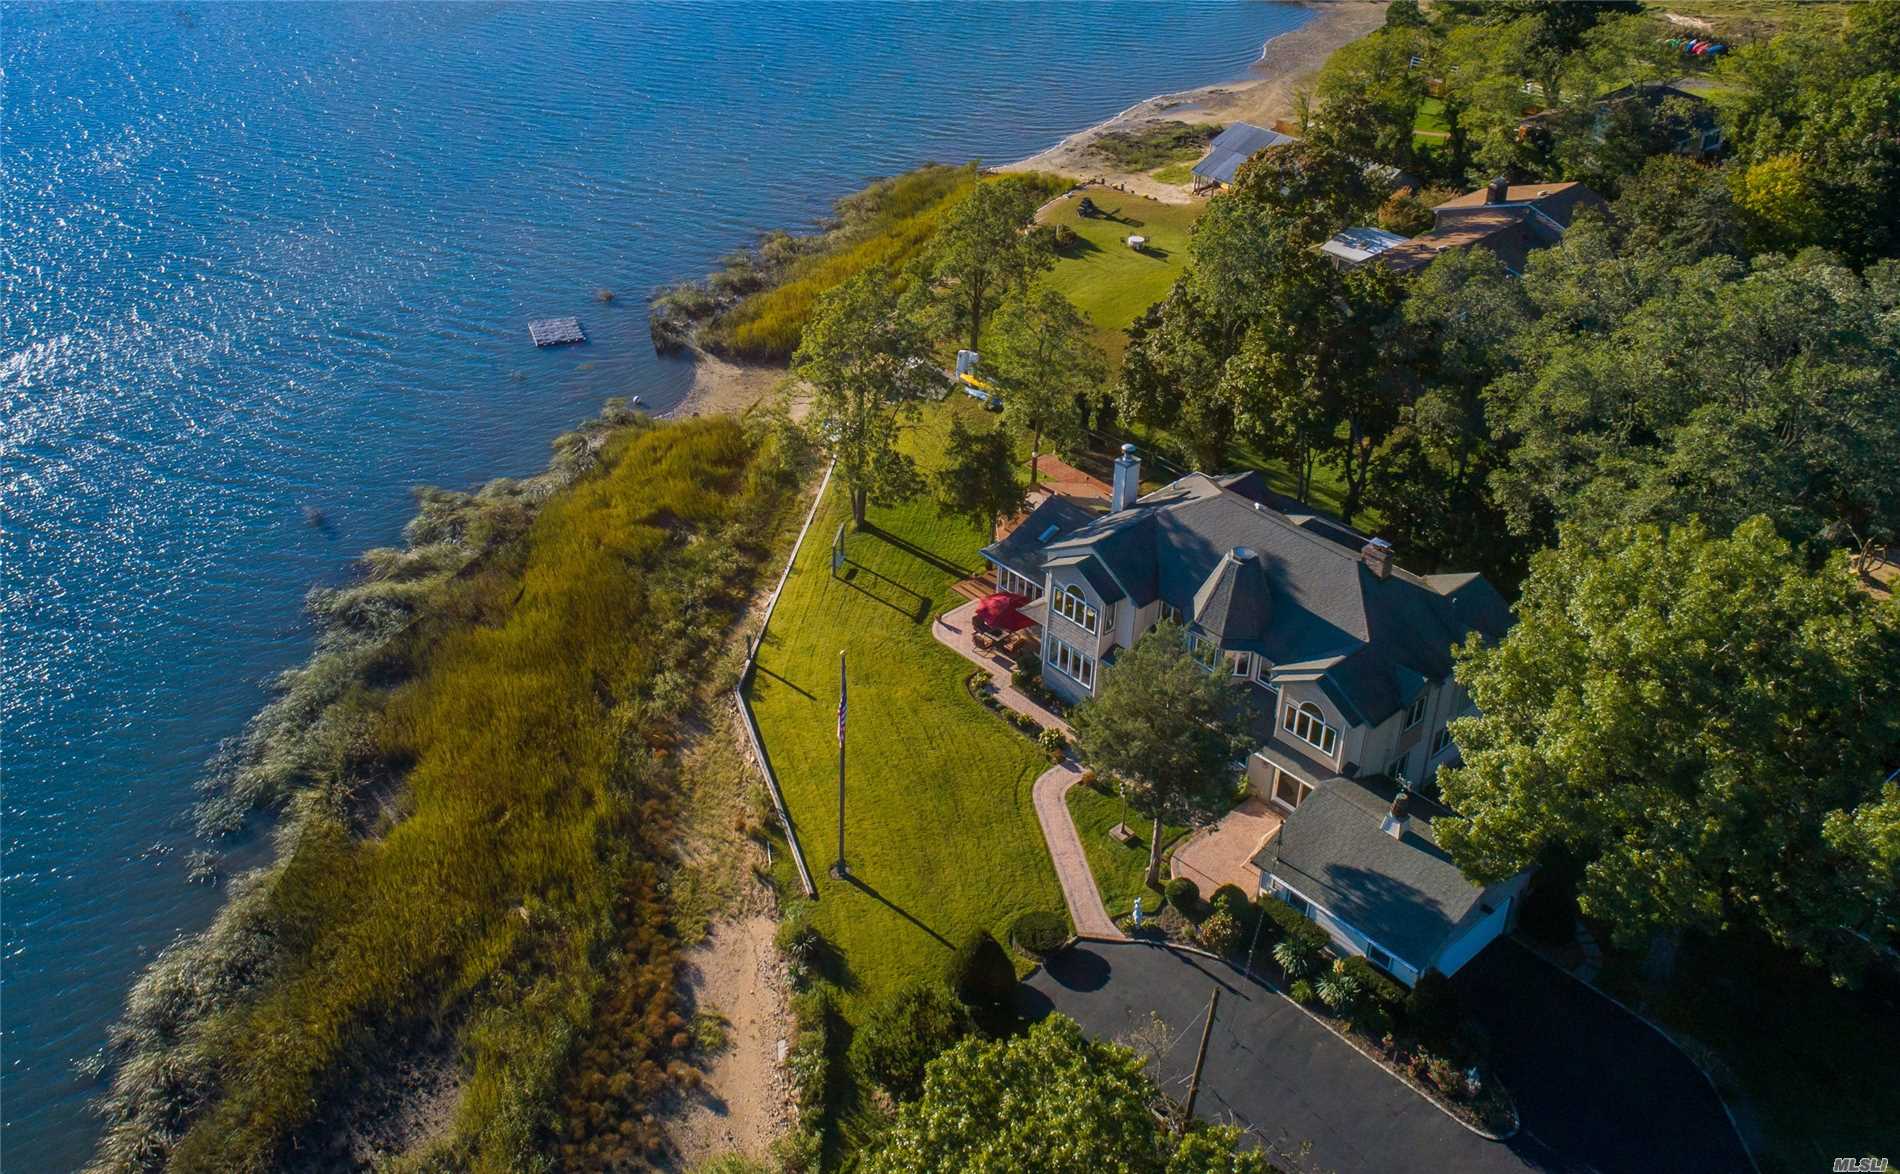 Views of the Harbor stretch endlessly from most every room. This amazing bay front property has large picture windows and doors that open to a soft grassy lawn overlooking picturesque Mill Neck. Warm wood finishes, lofty ceilings, a wood-burning fireplace and open spaces to gather and entertain lend charm and grace to this compound.